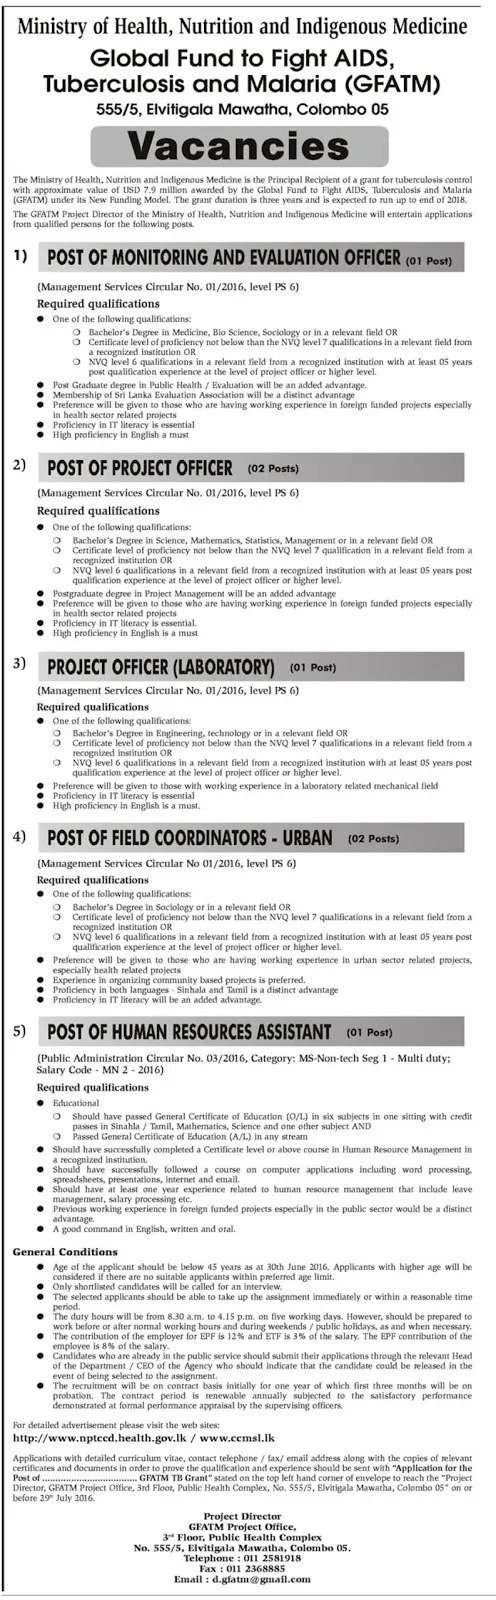 GFATM Project Vacancies in Ministry of Health